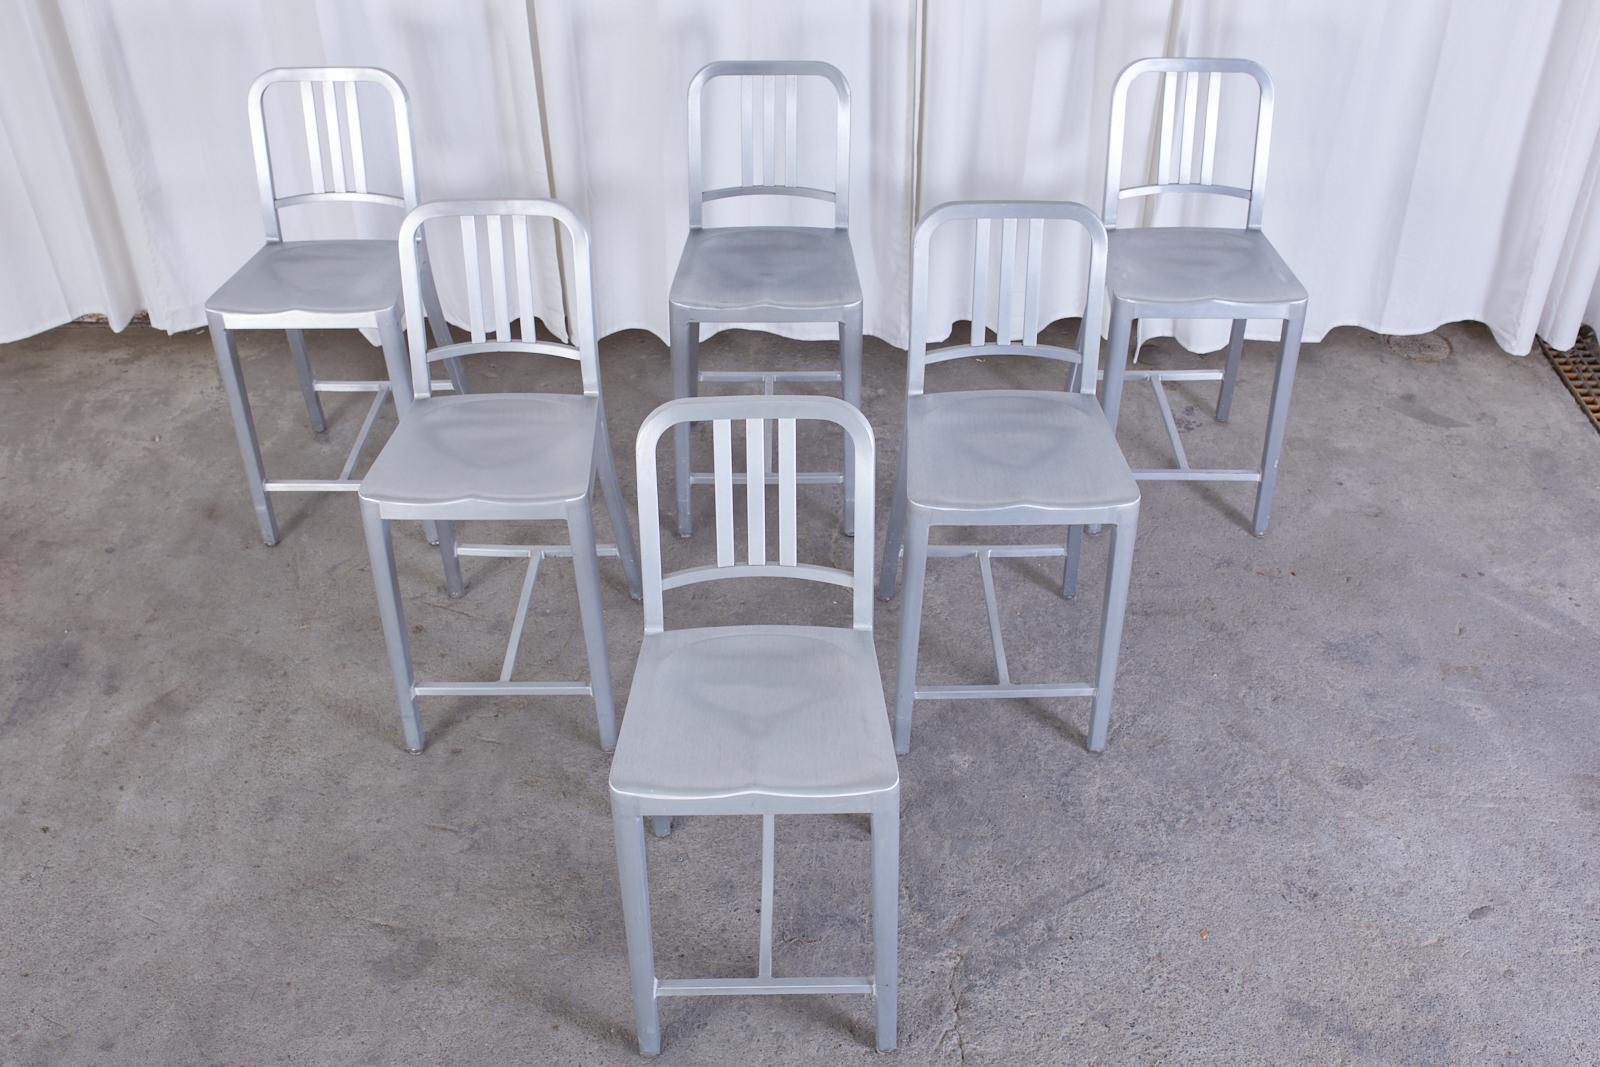 Iconic American set of six navy counter height stools finished in brushed aluminum made by Emeco. Designed in 1944 and still in production today. The navy chair is hand-formed from recycled aluminum. Seat is stamped Emeco on back with a